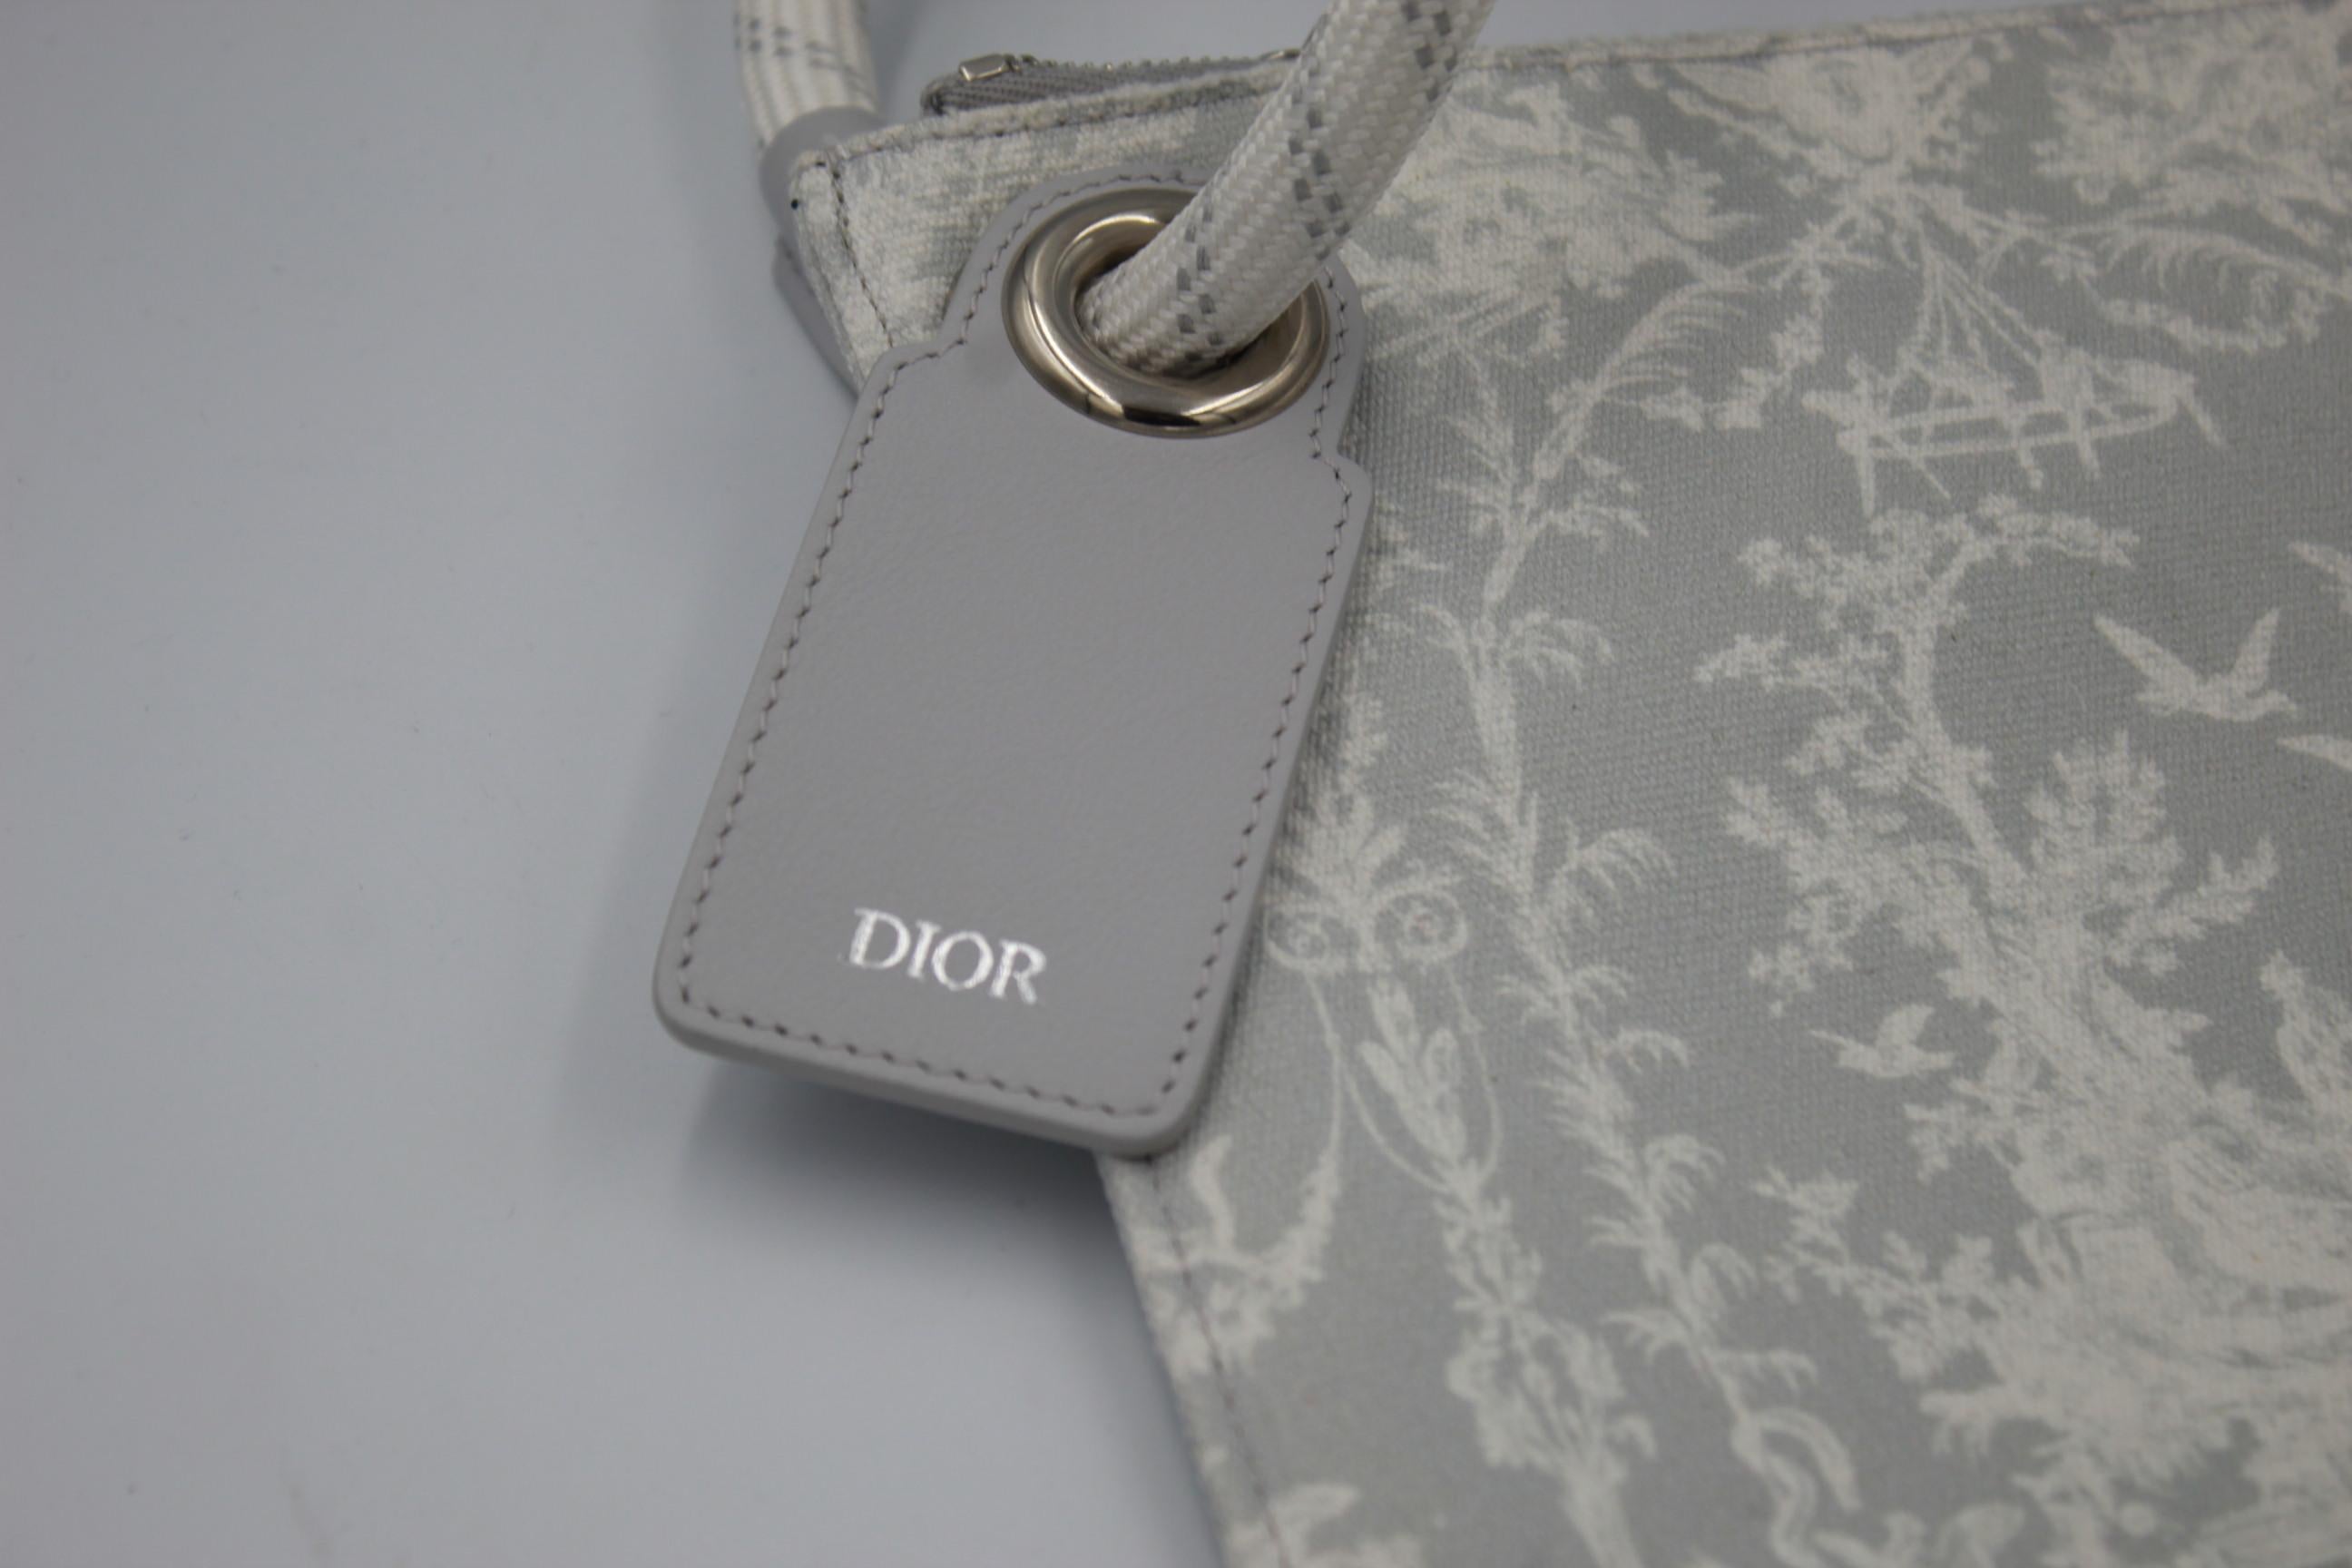 Dior Hand Clutch in Canvas from collection 2018. good condition, light use. Size 27.5*20 cm